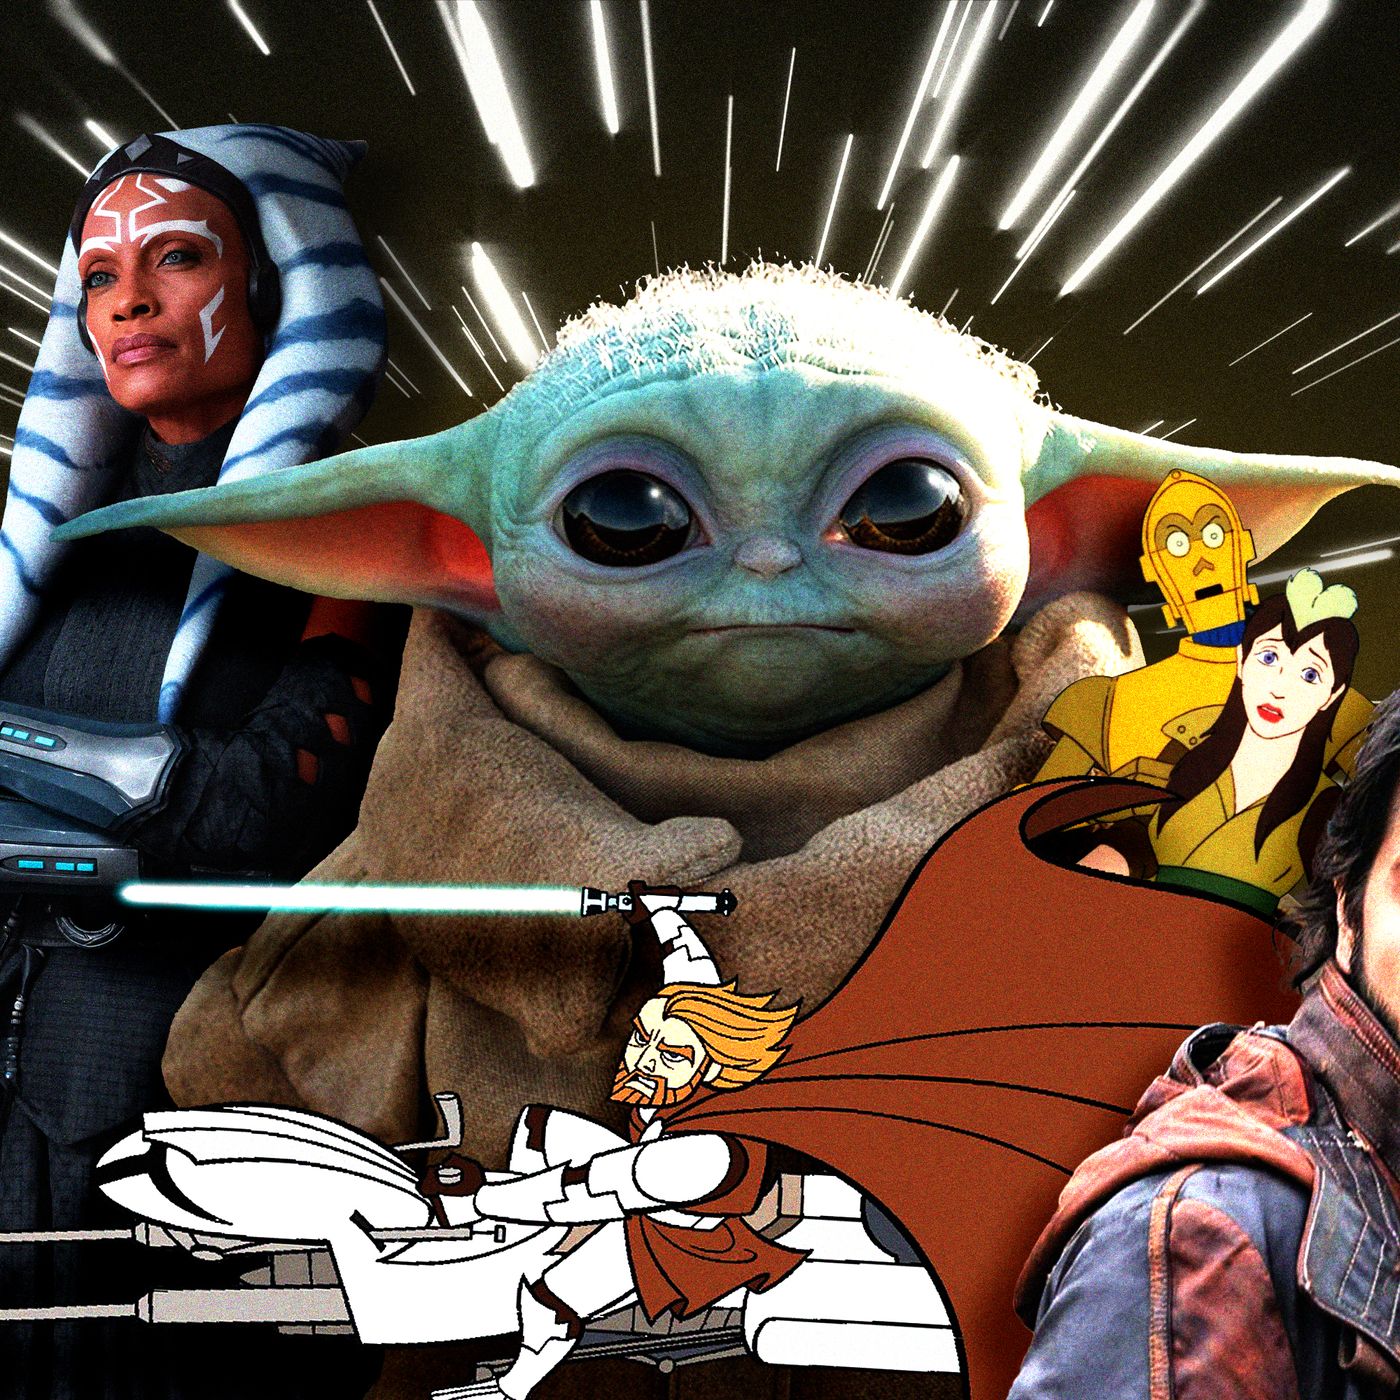 7 Most Powerful Jedi in Star Wars Canon - The Fantasy Review